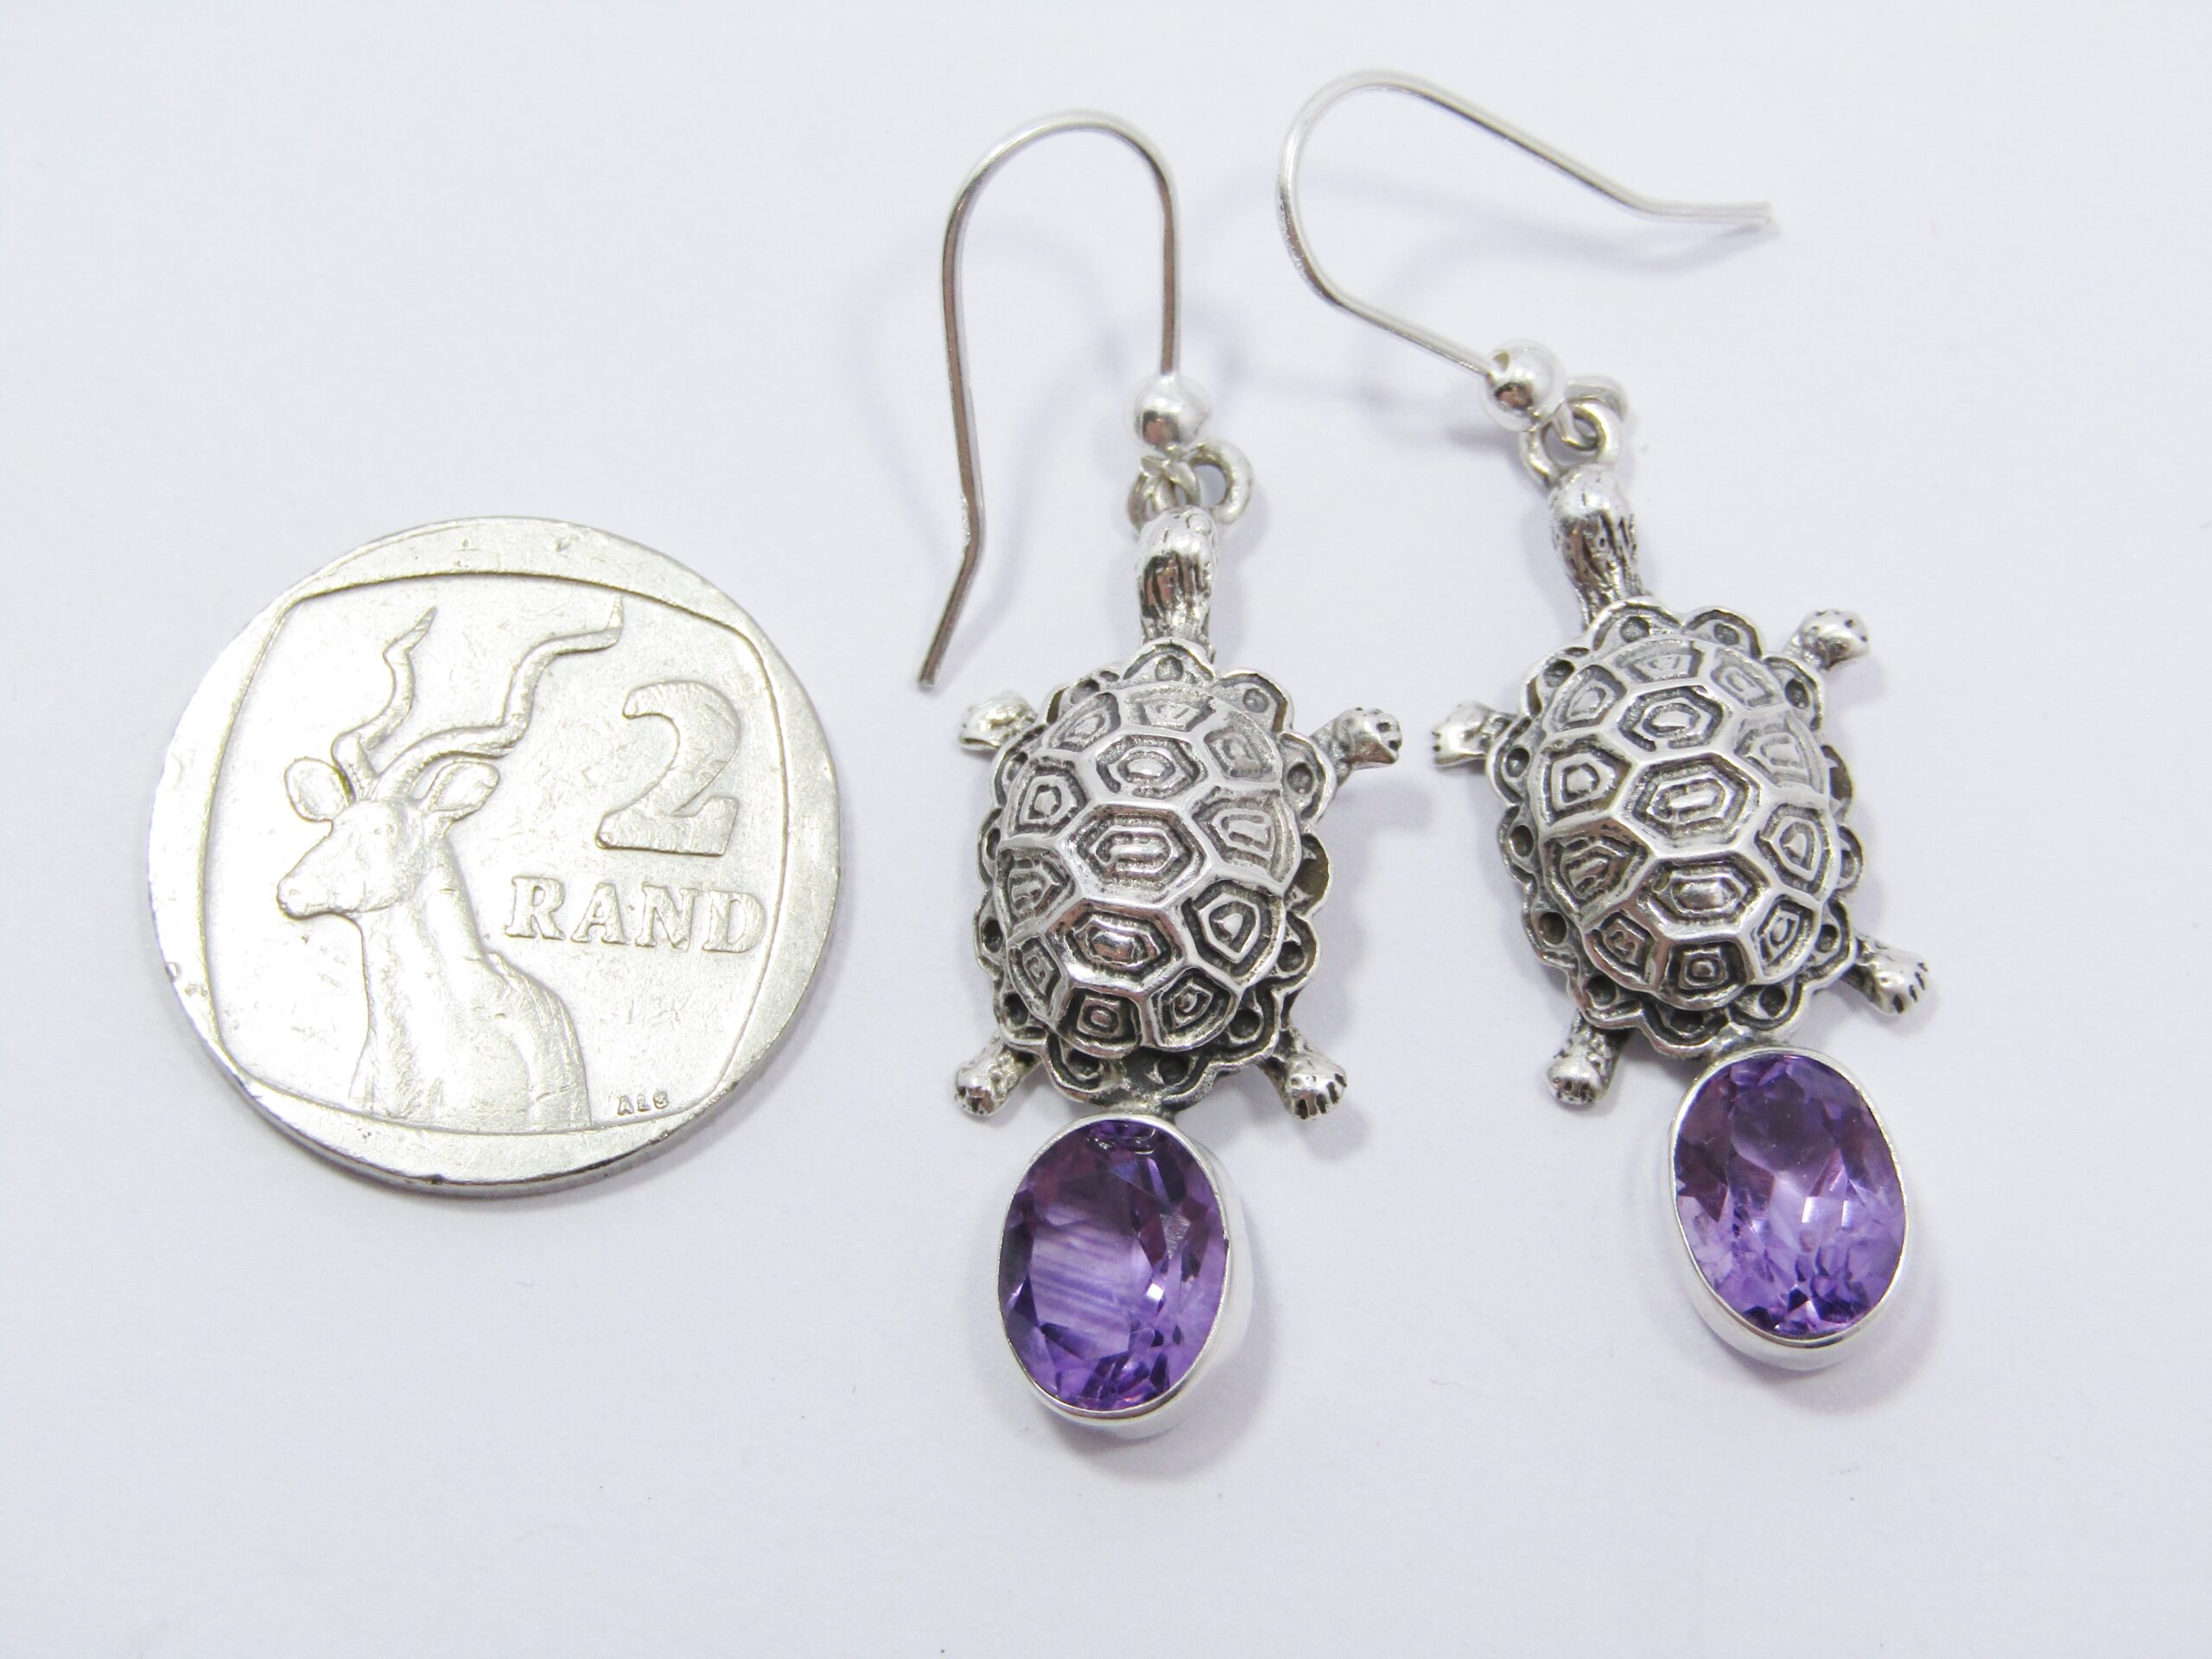 A Gorgeous Pair of Turtle Earrings With Amethyst Gemstones in Sterling Silver.